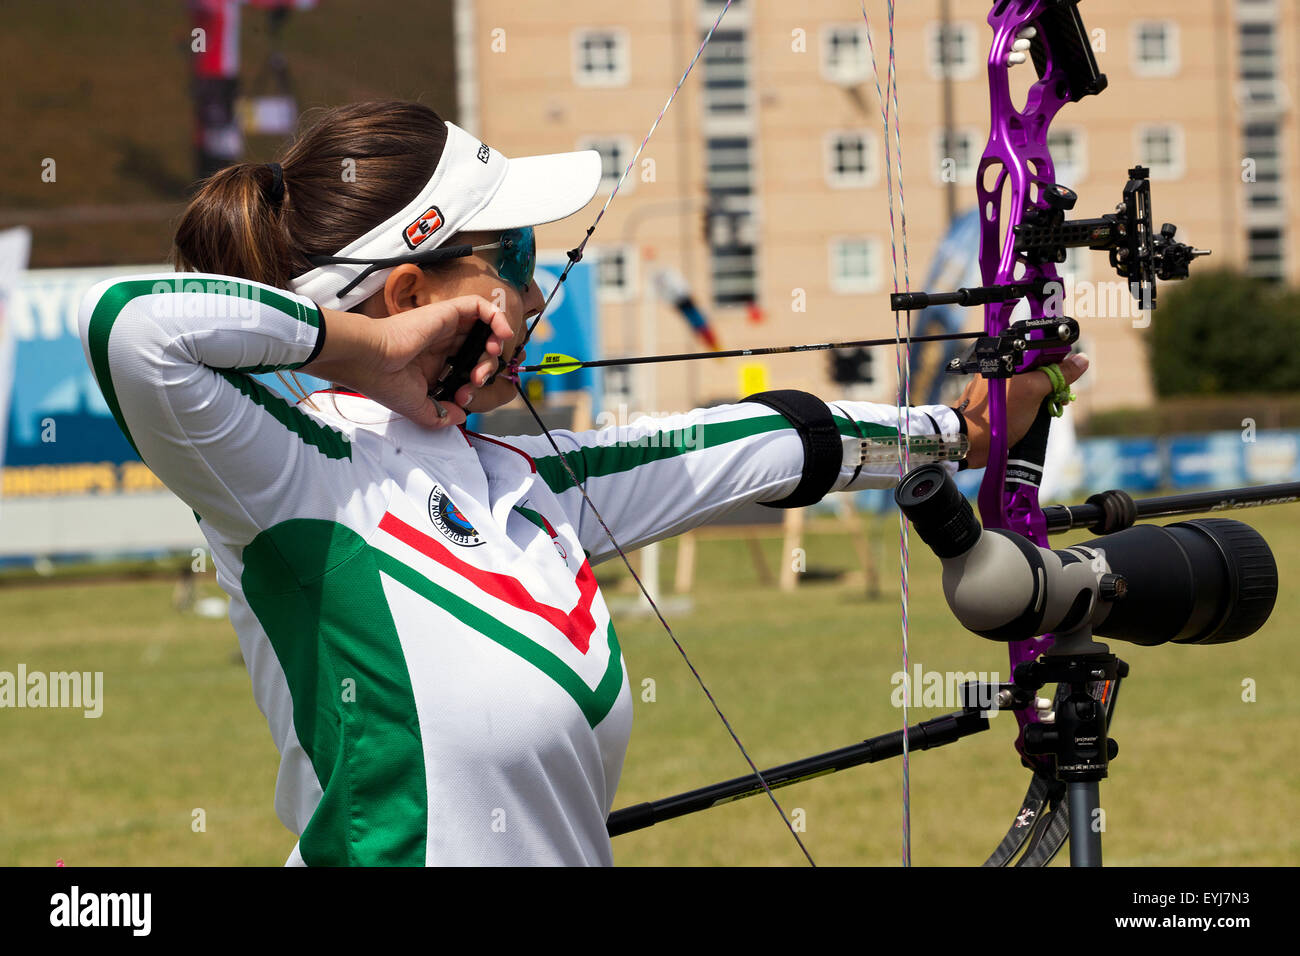 Copenhagen, Denmark, July 30th, 2015: Mexican archer Linda Ochoa competes in the World Archery Championships in Copenhagen during Thursday's individual matches  in compound bow. Credit:  OJPHOTOS/Alamy Live News Stock Photo